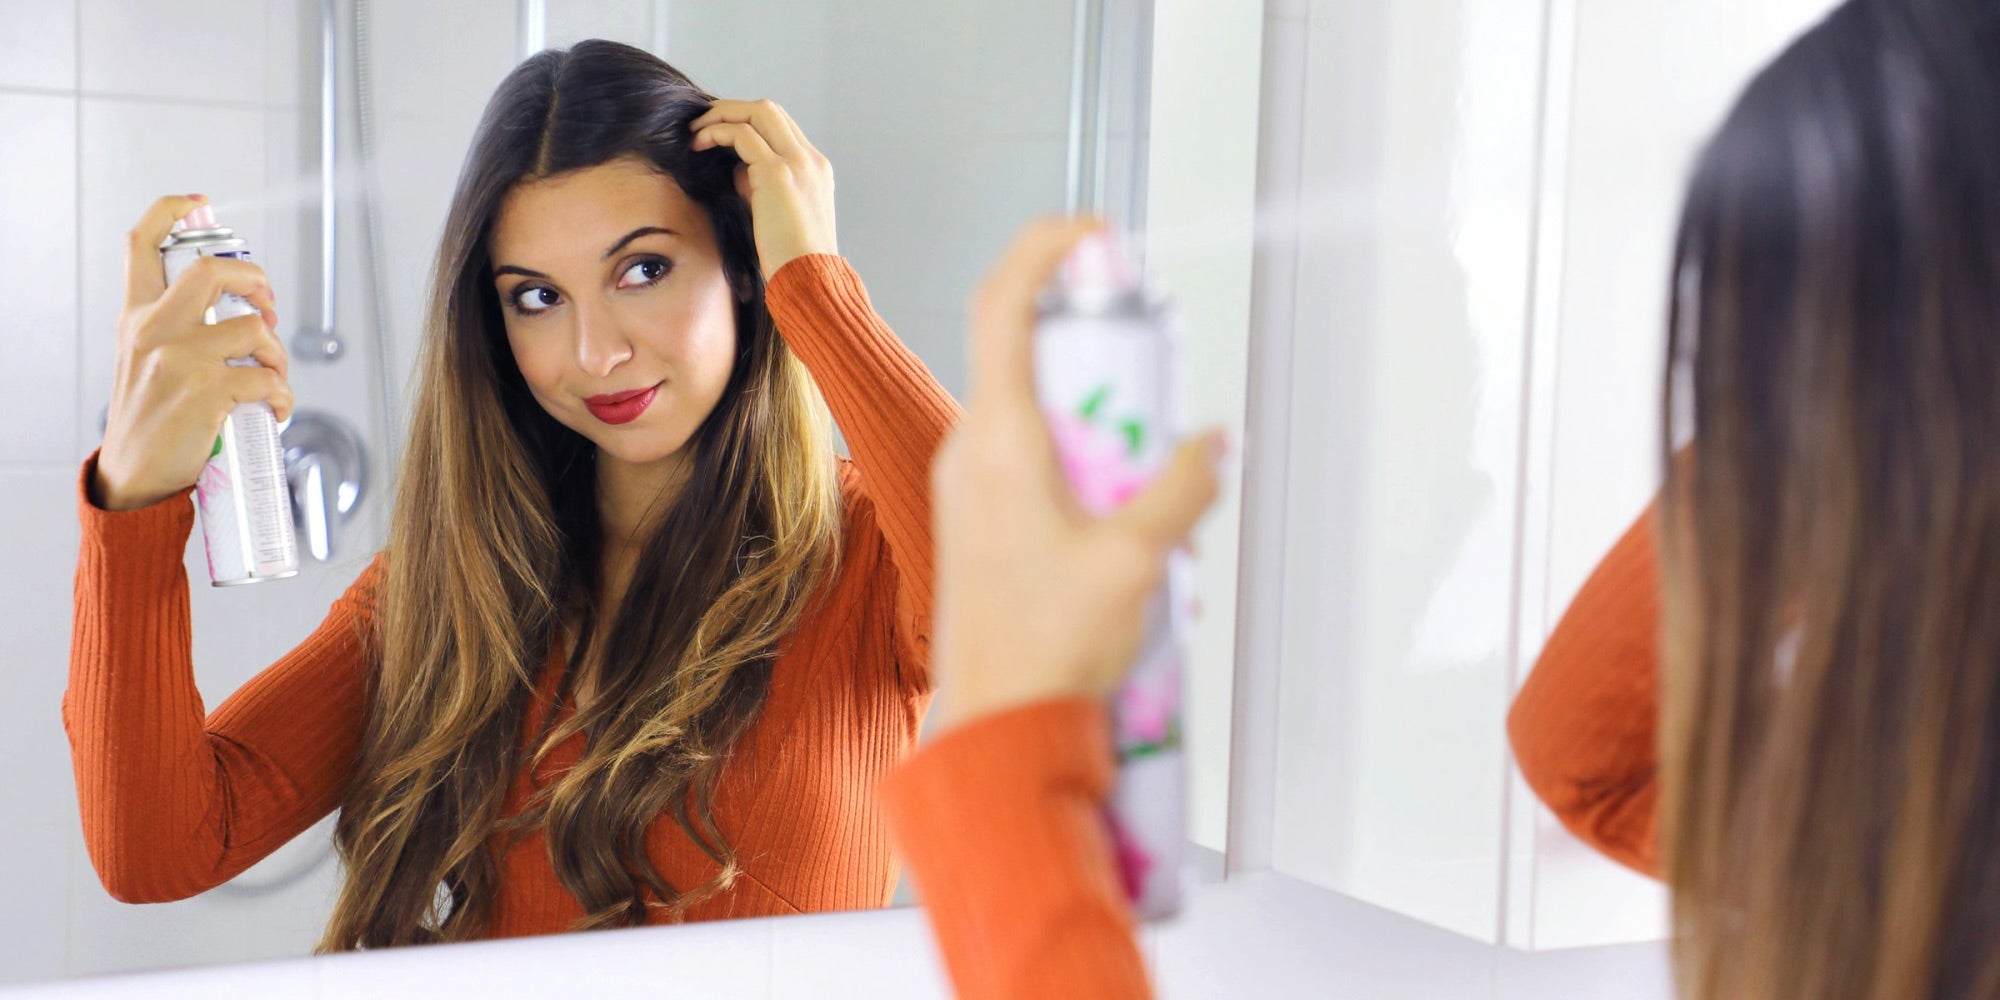 Skipping a shampoo? 15 products to refresh hair in between washes